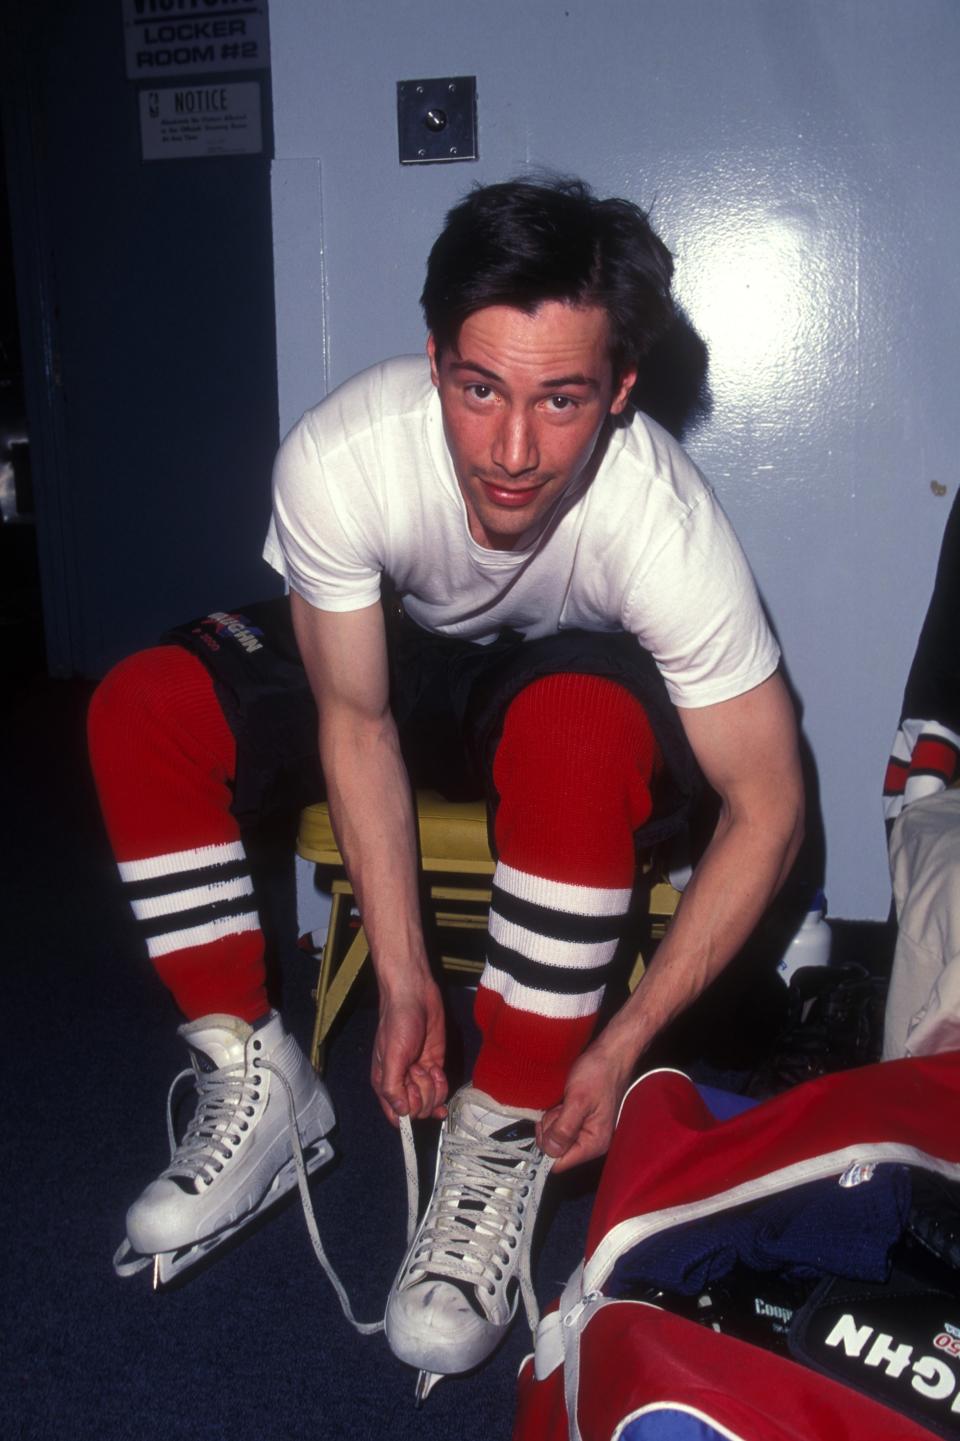 KEANU REEVES
Simi Valley, CA, 1997
Fun fact: Neo played goalie for his Canadian high school's hockey team.